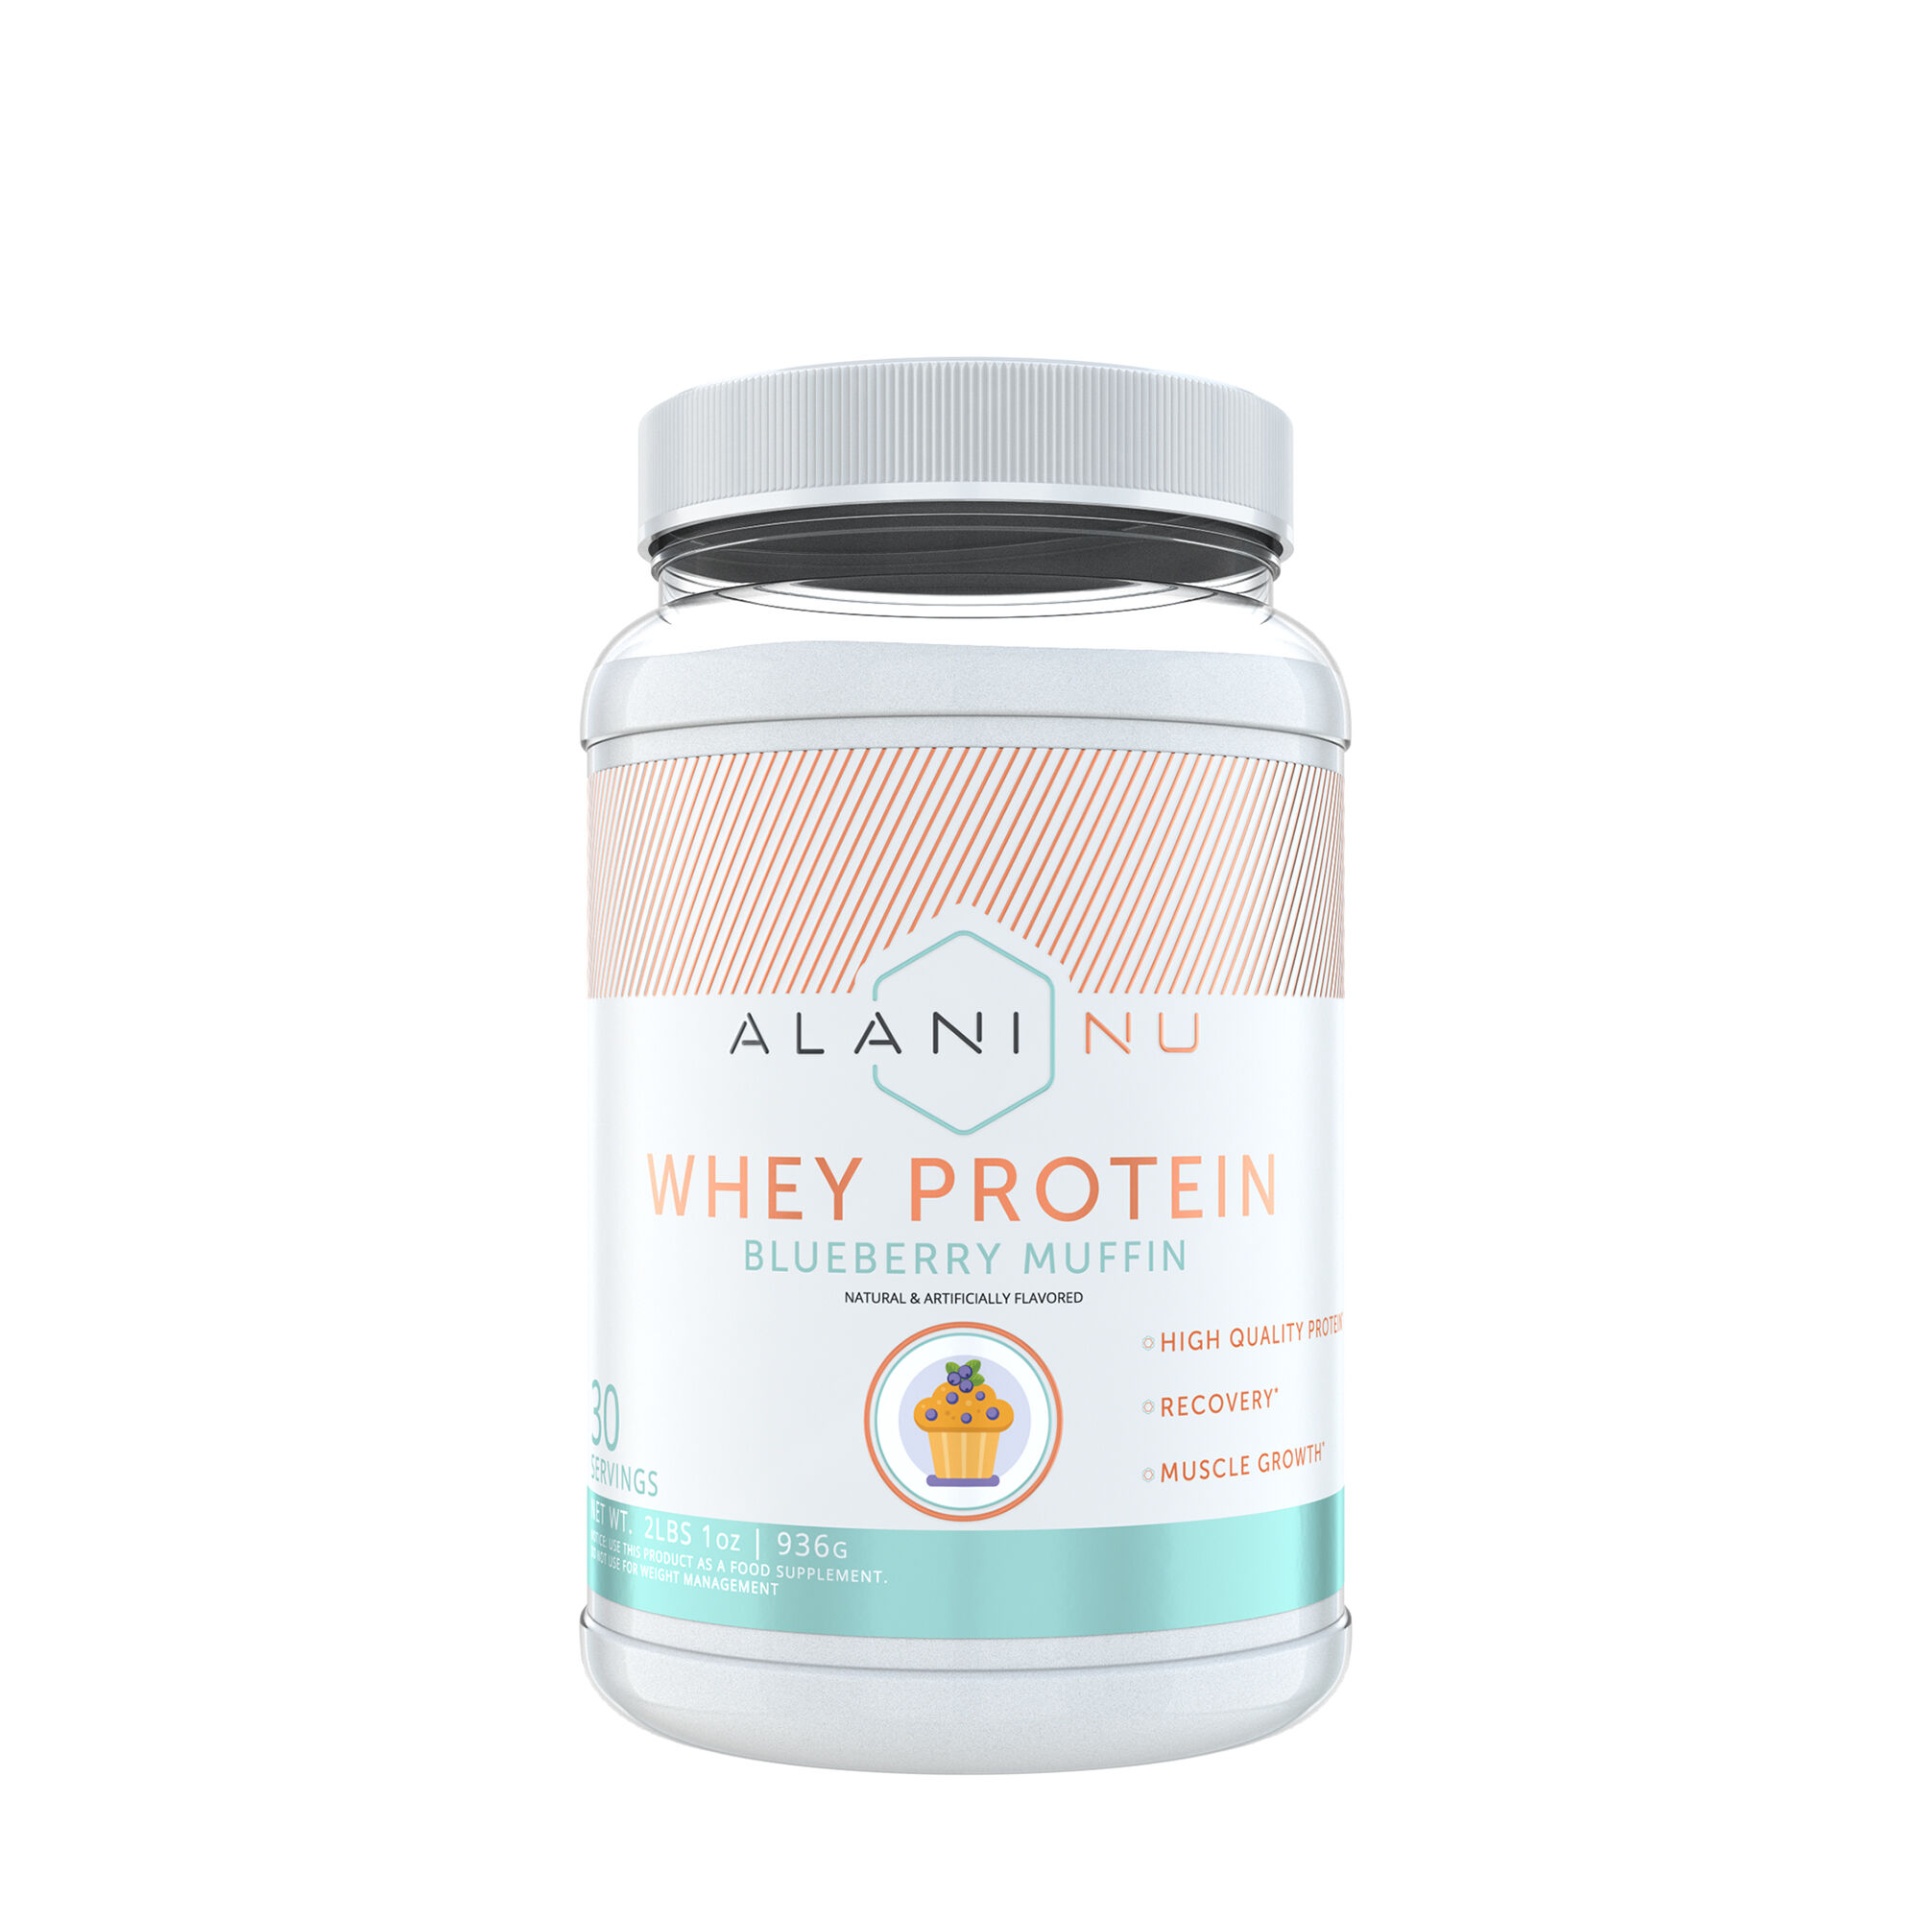 slide 1 of 1, Alani Nu Whey Protein Powder - Blueberry Muffin, 1 ct